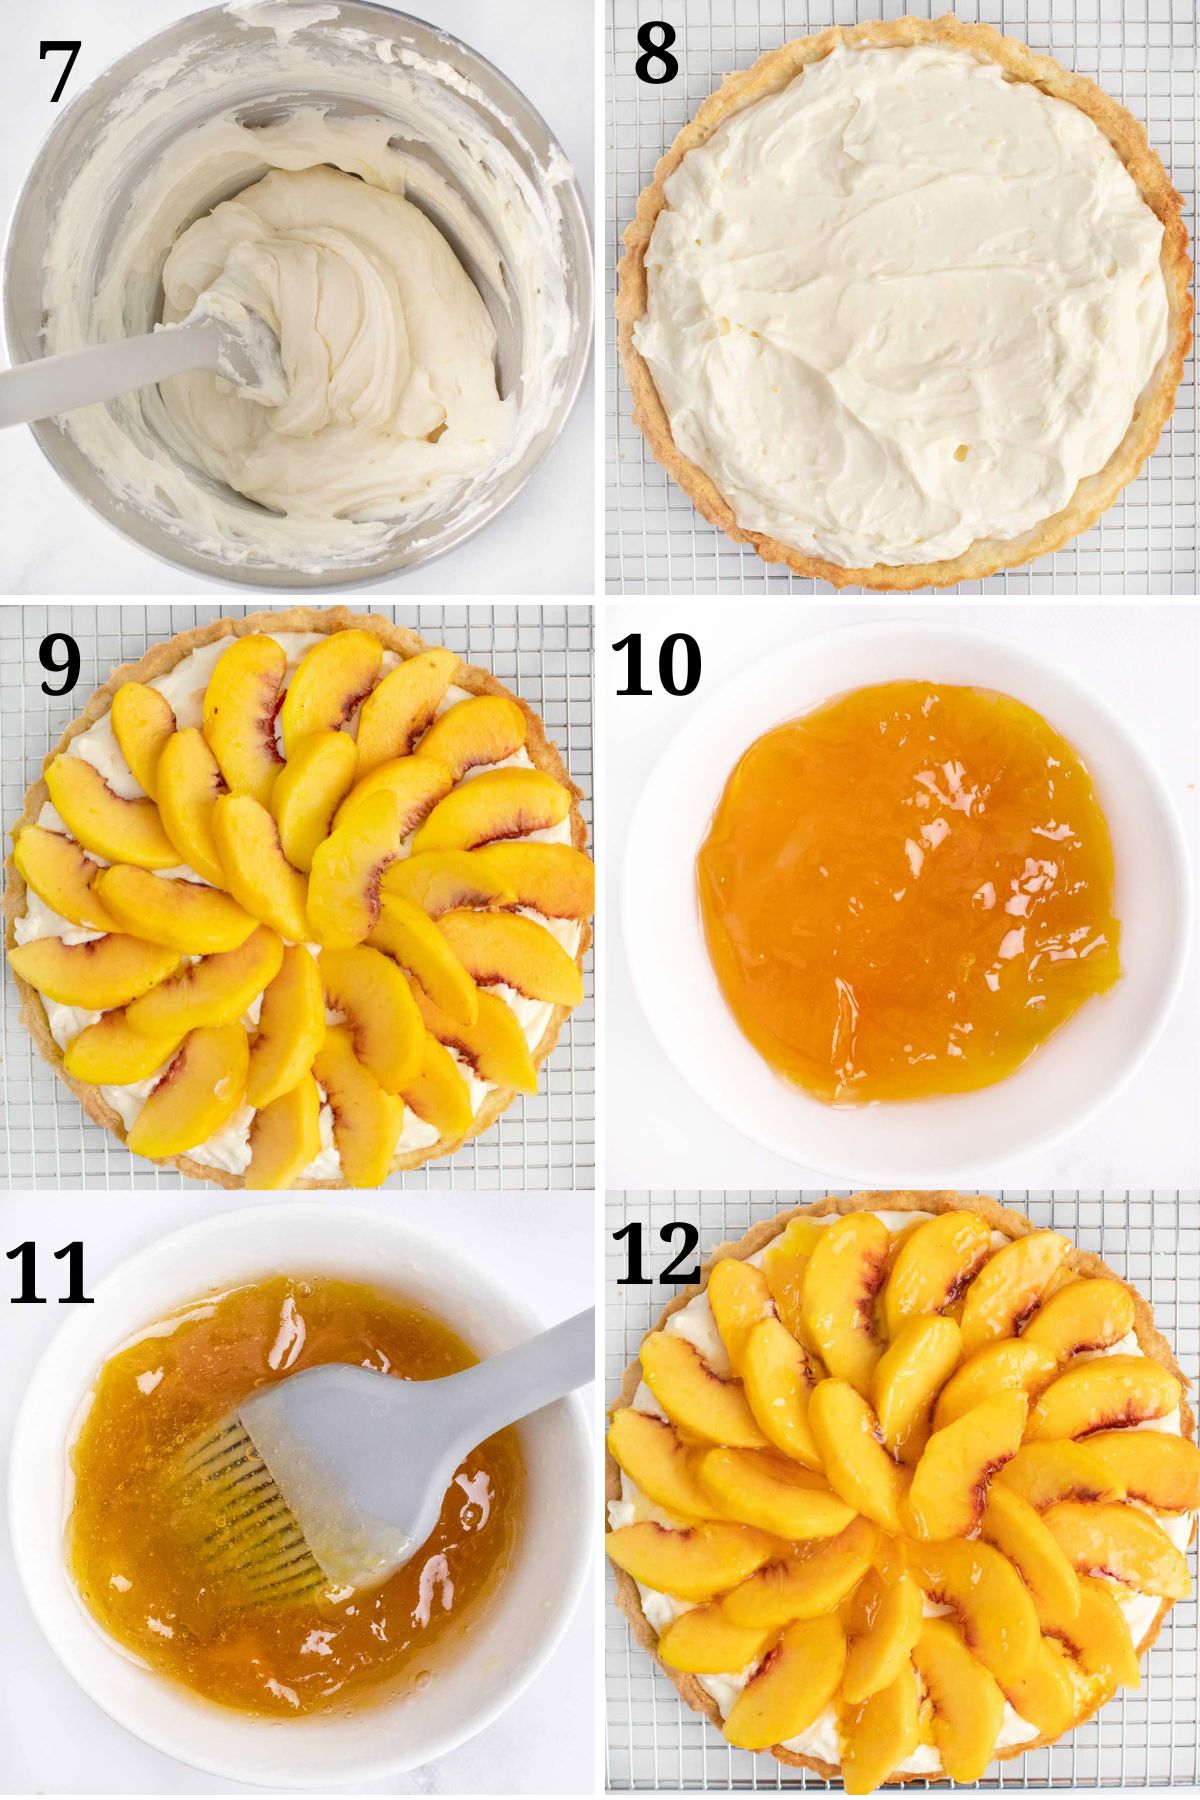 6 images showing how to finish making the no bake peach tart